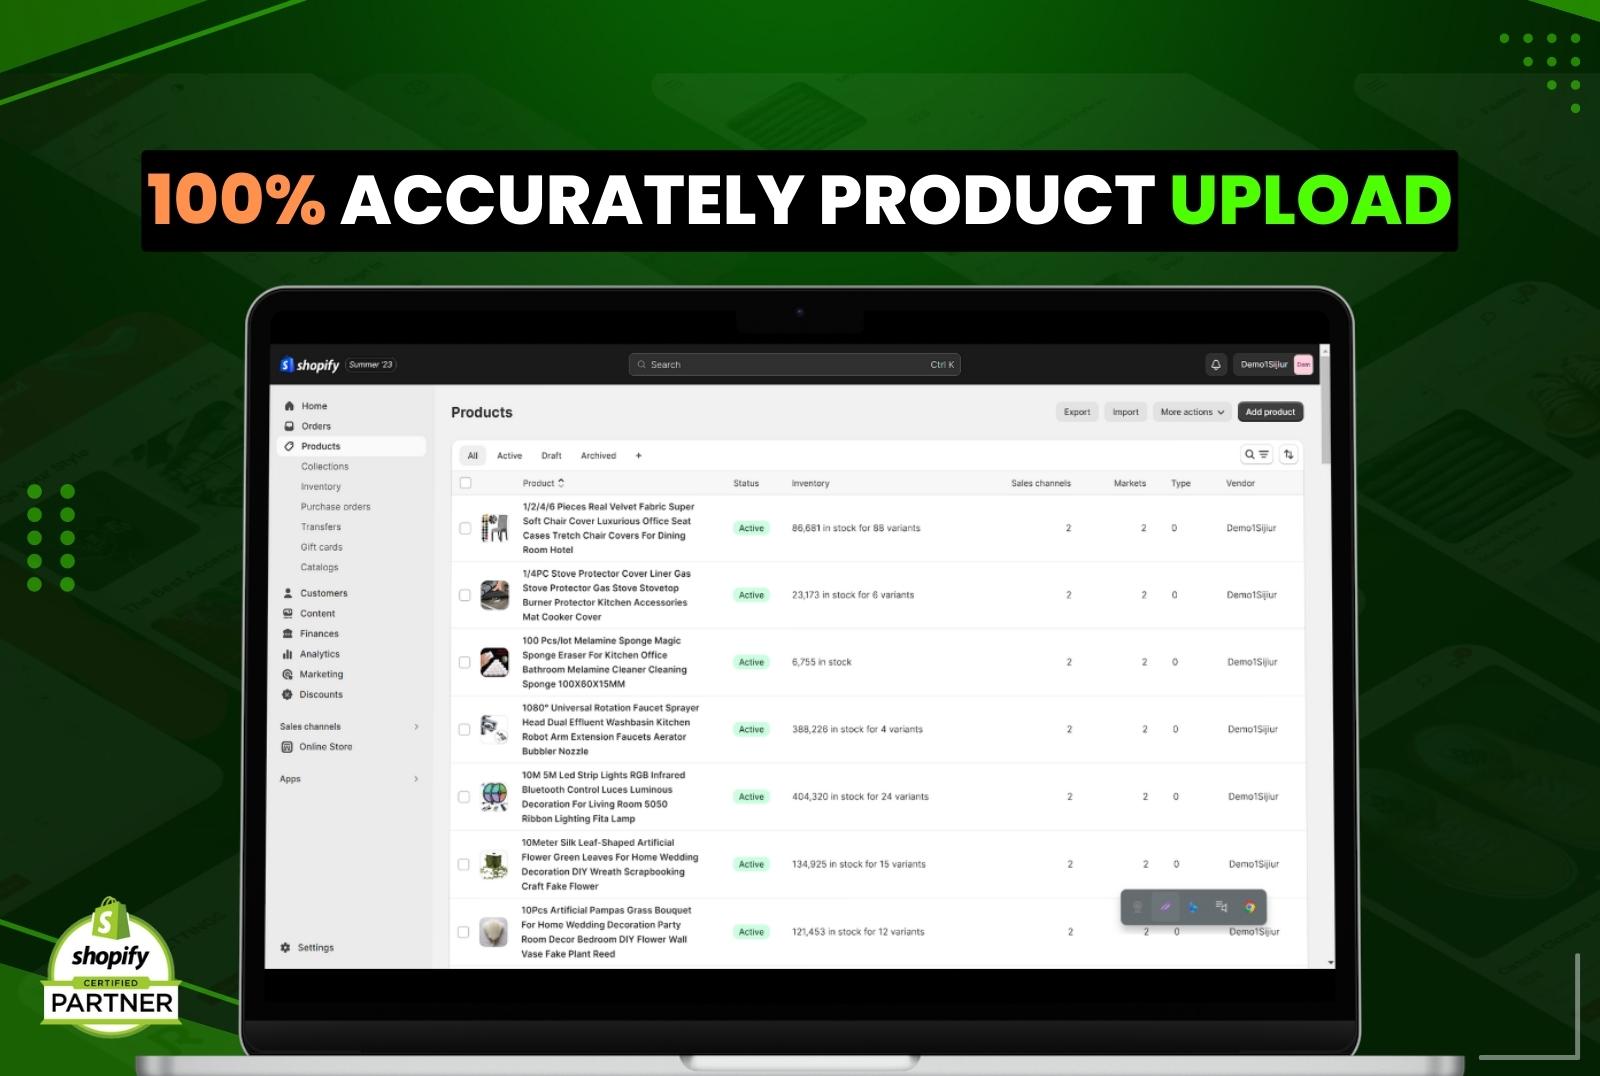 I will do prodoct upload to shopify or woocommerce or any ecommerce store accurately seo friendly